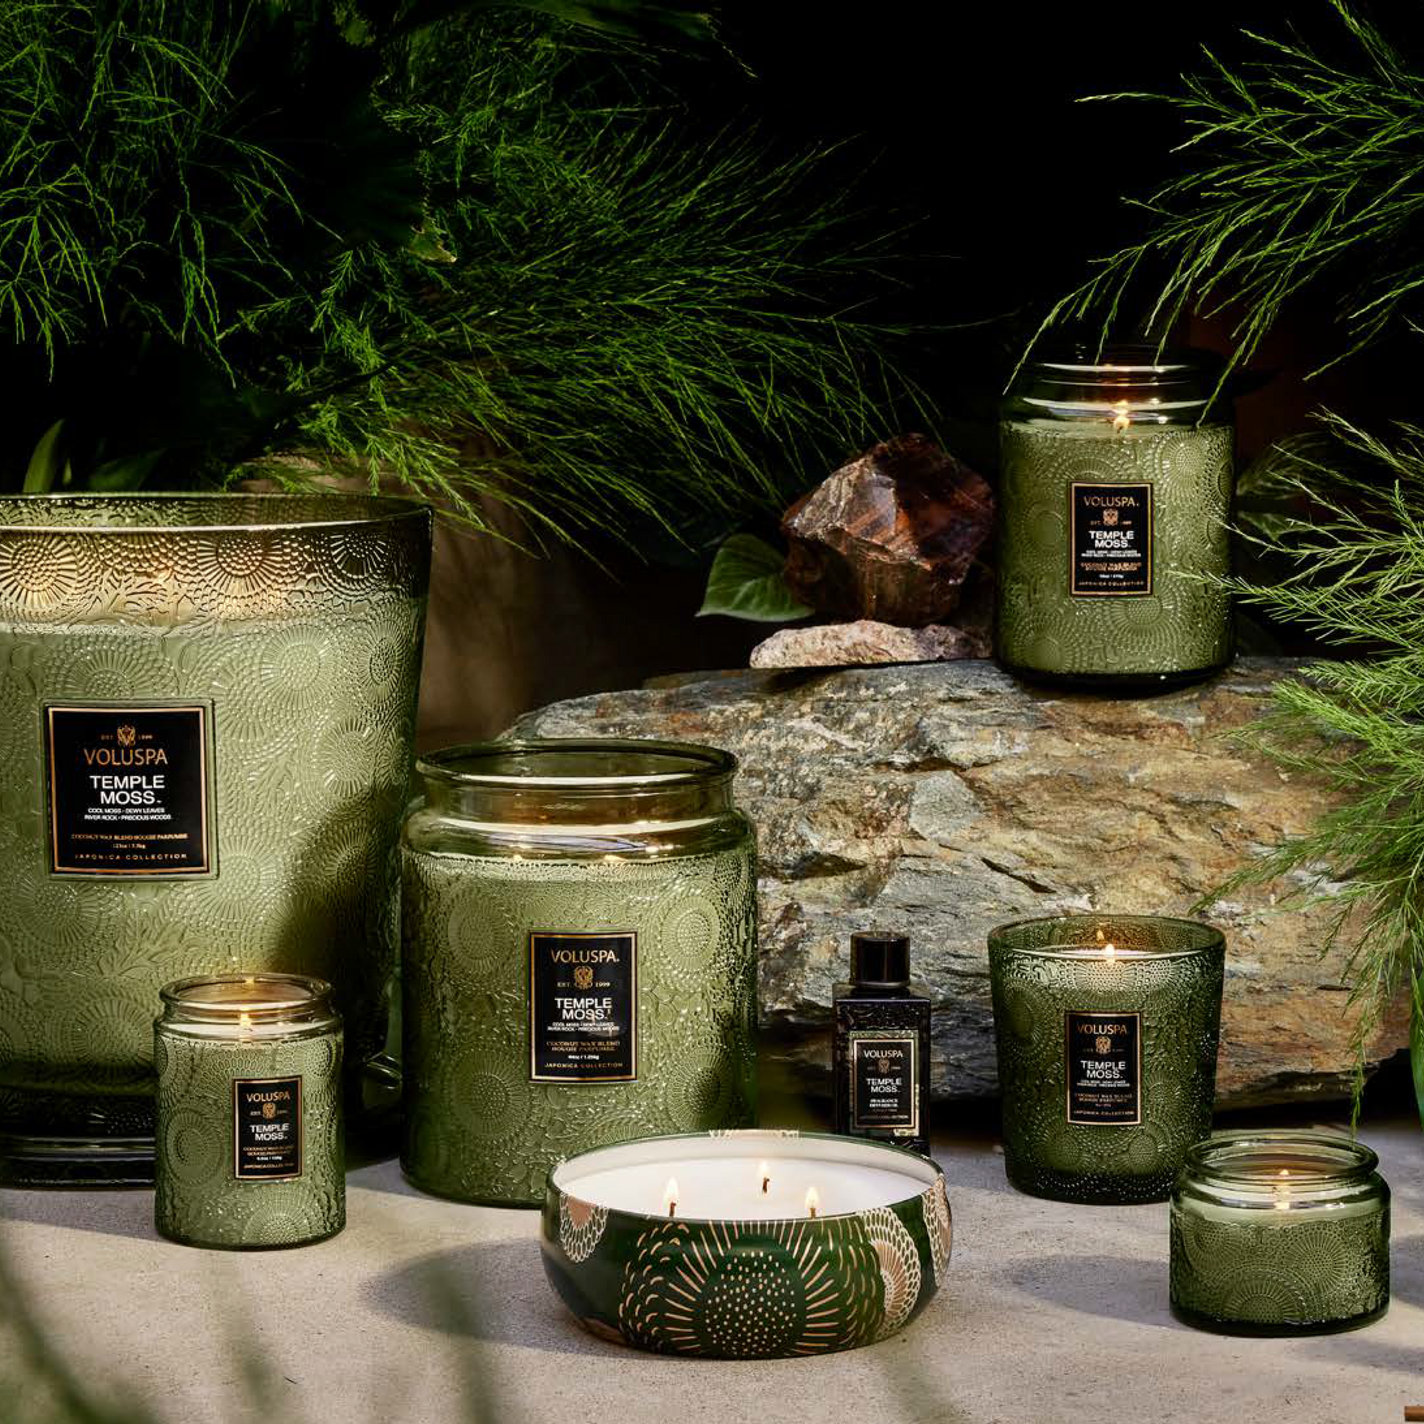 VOLUSPA Temple Moss 3 Wick Candle